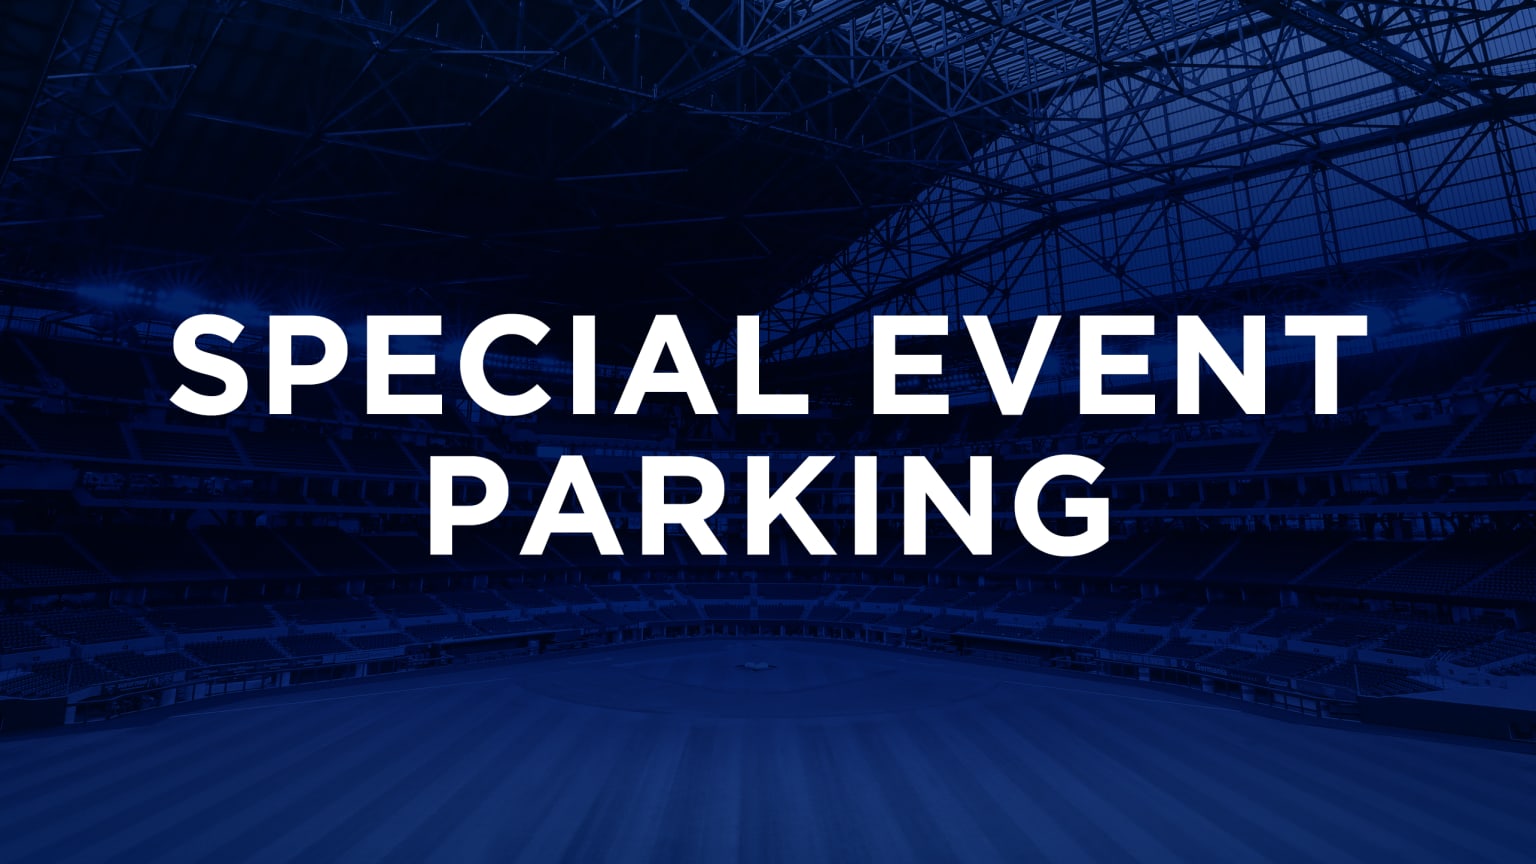 Texas Rangers on X: Looking for a spot to park or tailgate this Sunday?  Our lots open at 10am!  / X